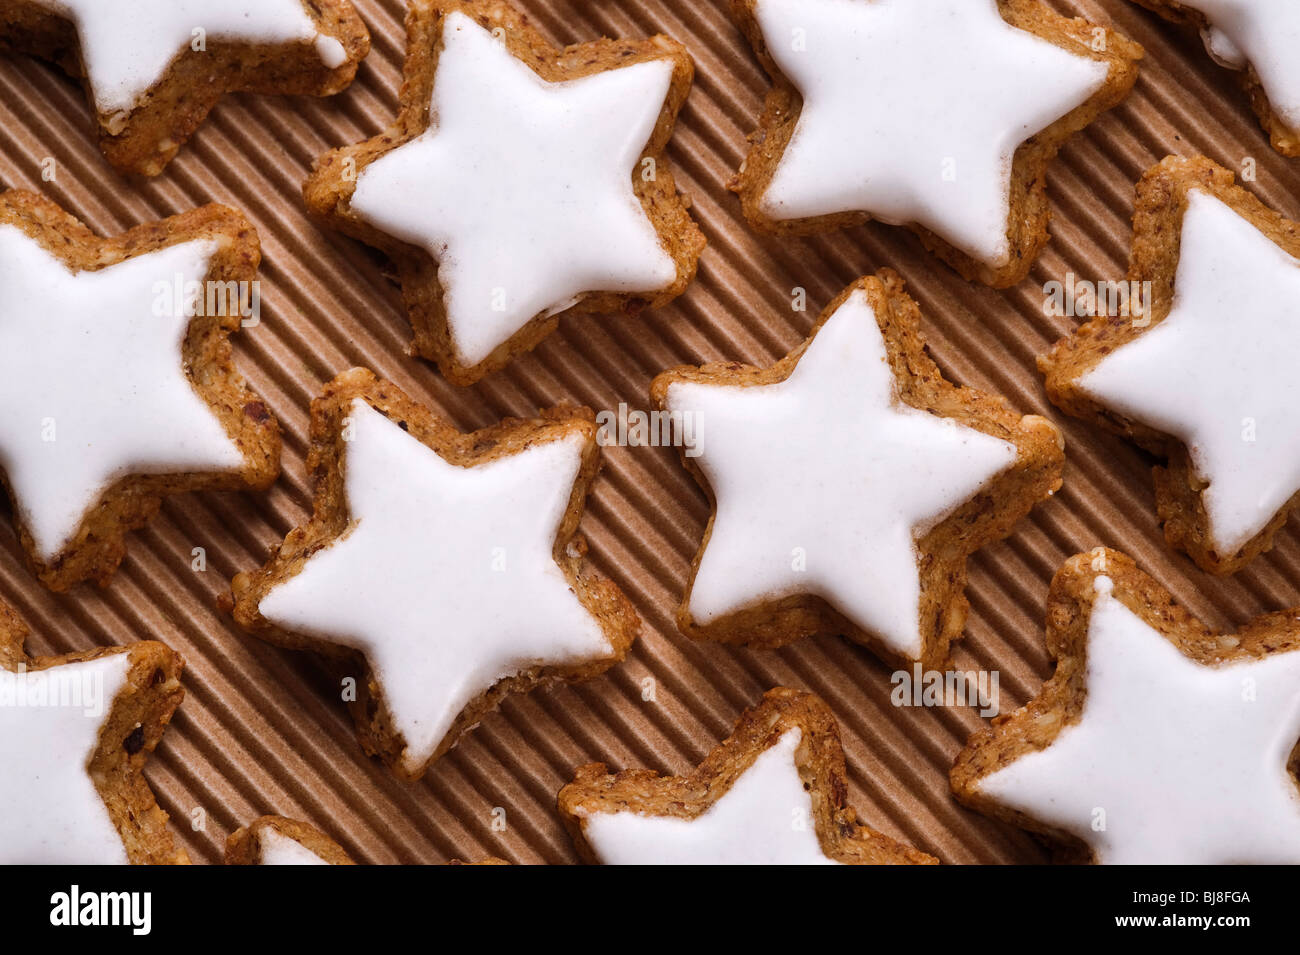 glazed nut star shaped cookies on paper background Stock Photo